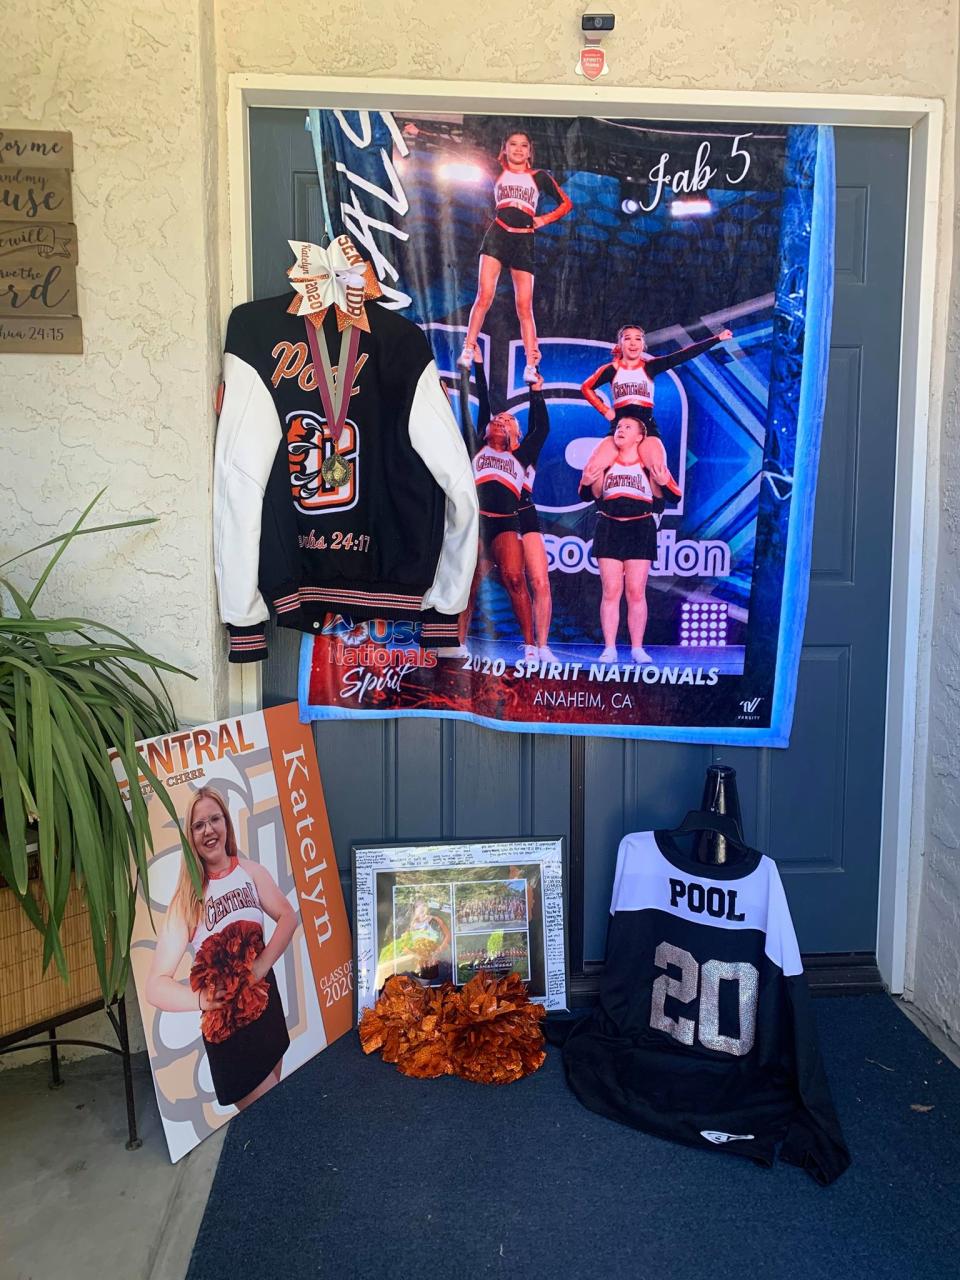 Darla Pool put this door together to show her daughter, Katelyn, who is a senior, how proud she is of her. (Photo: Darla Pool)